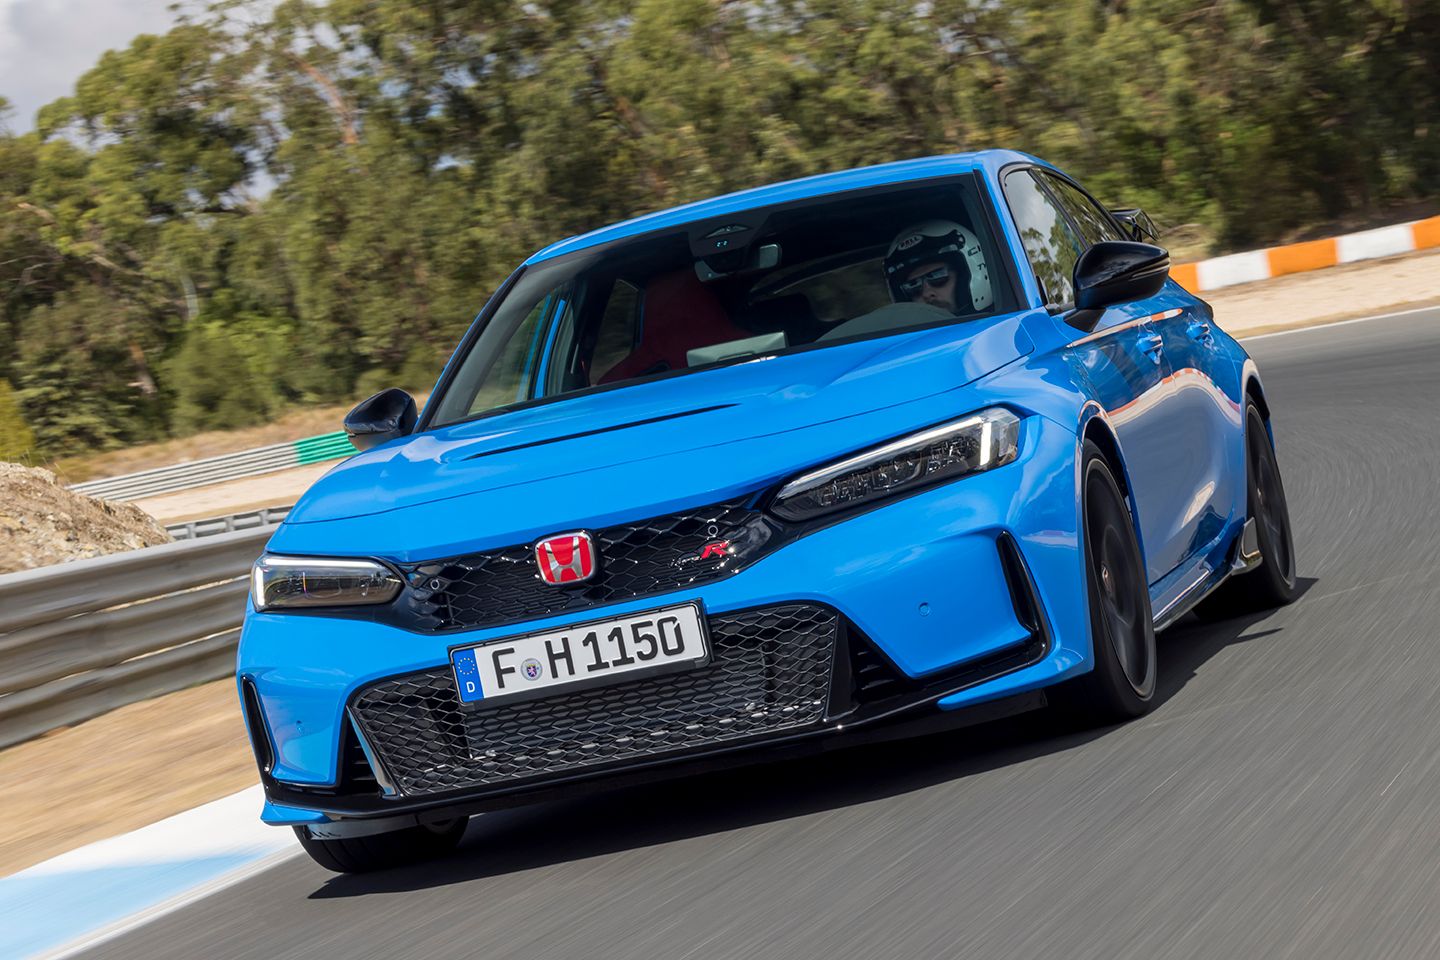 2023 Honda Civic Type R Review: Still the GOAT?